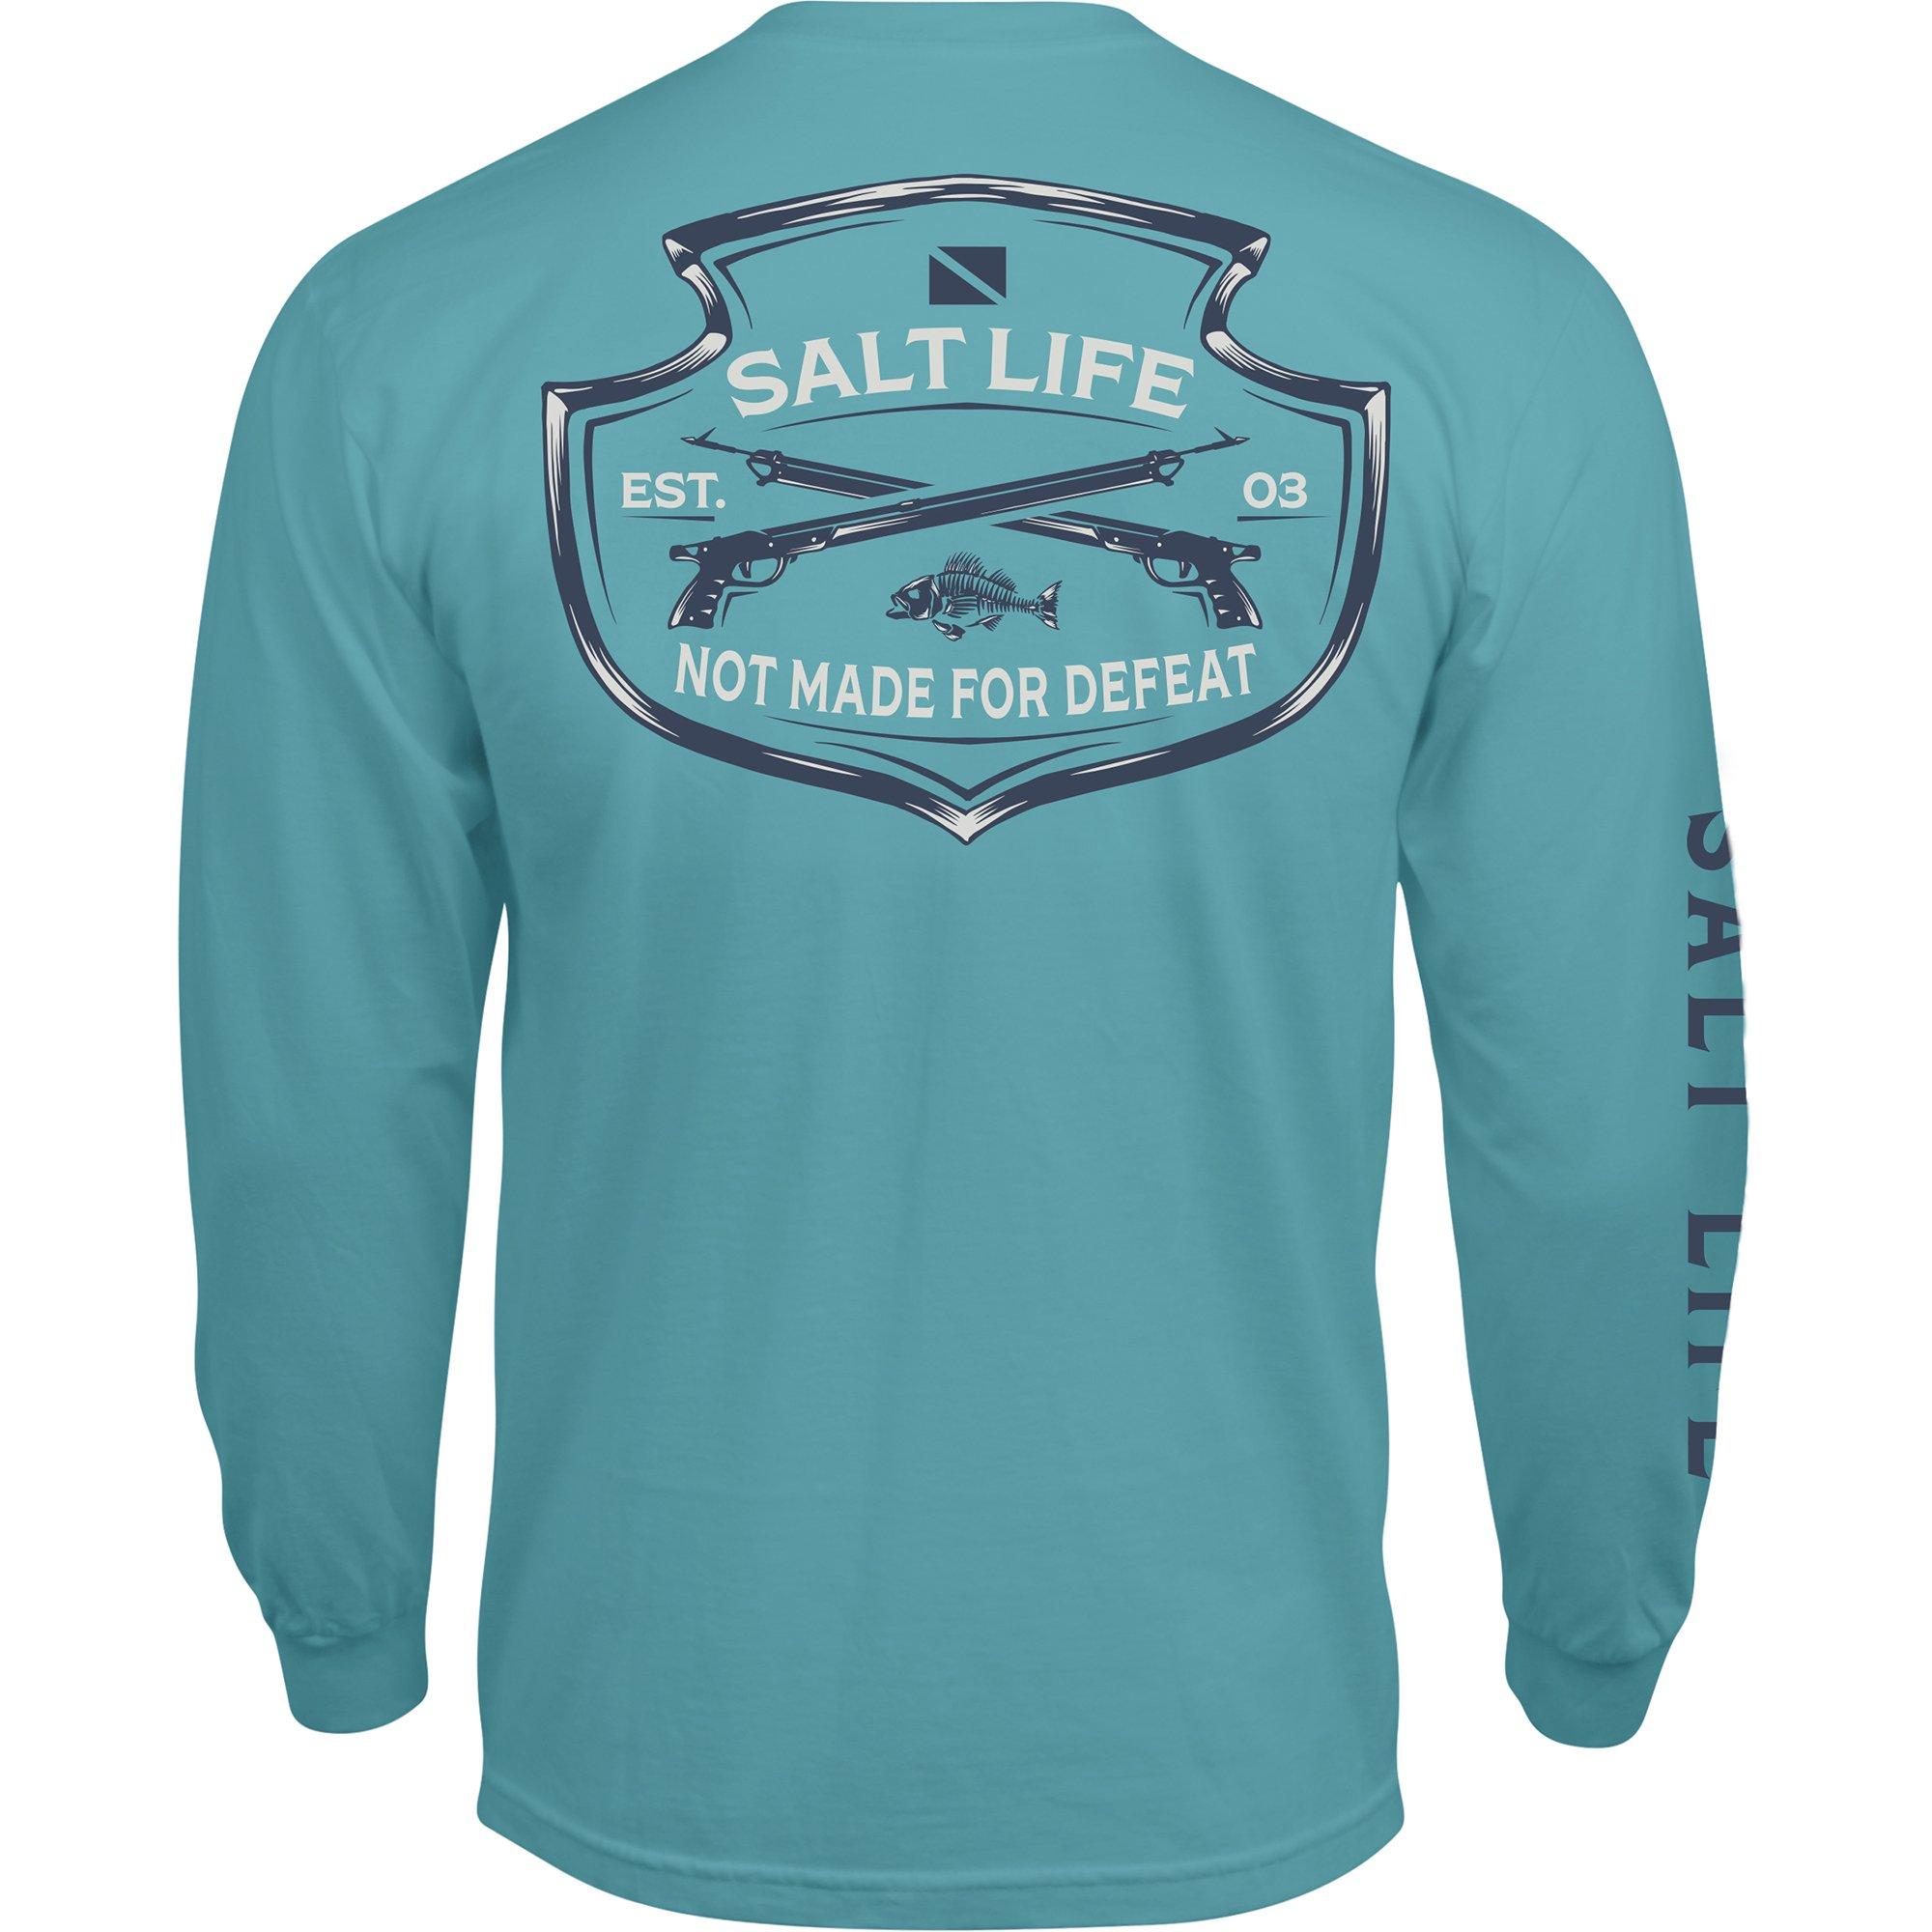 https://images.beallsflorida.com/i/beallsflorida/751-7258-6932-30-yyy/*Mens-Not-Made-For-Defeat-Long-Sleeve-Tee*?$product$&fmt=auto&qlt=default